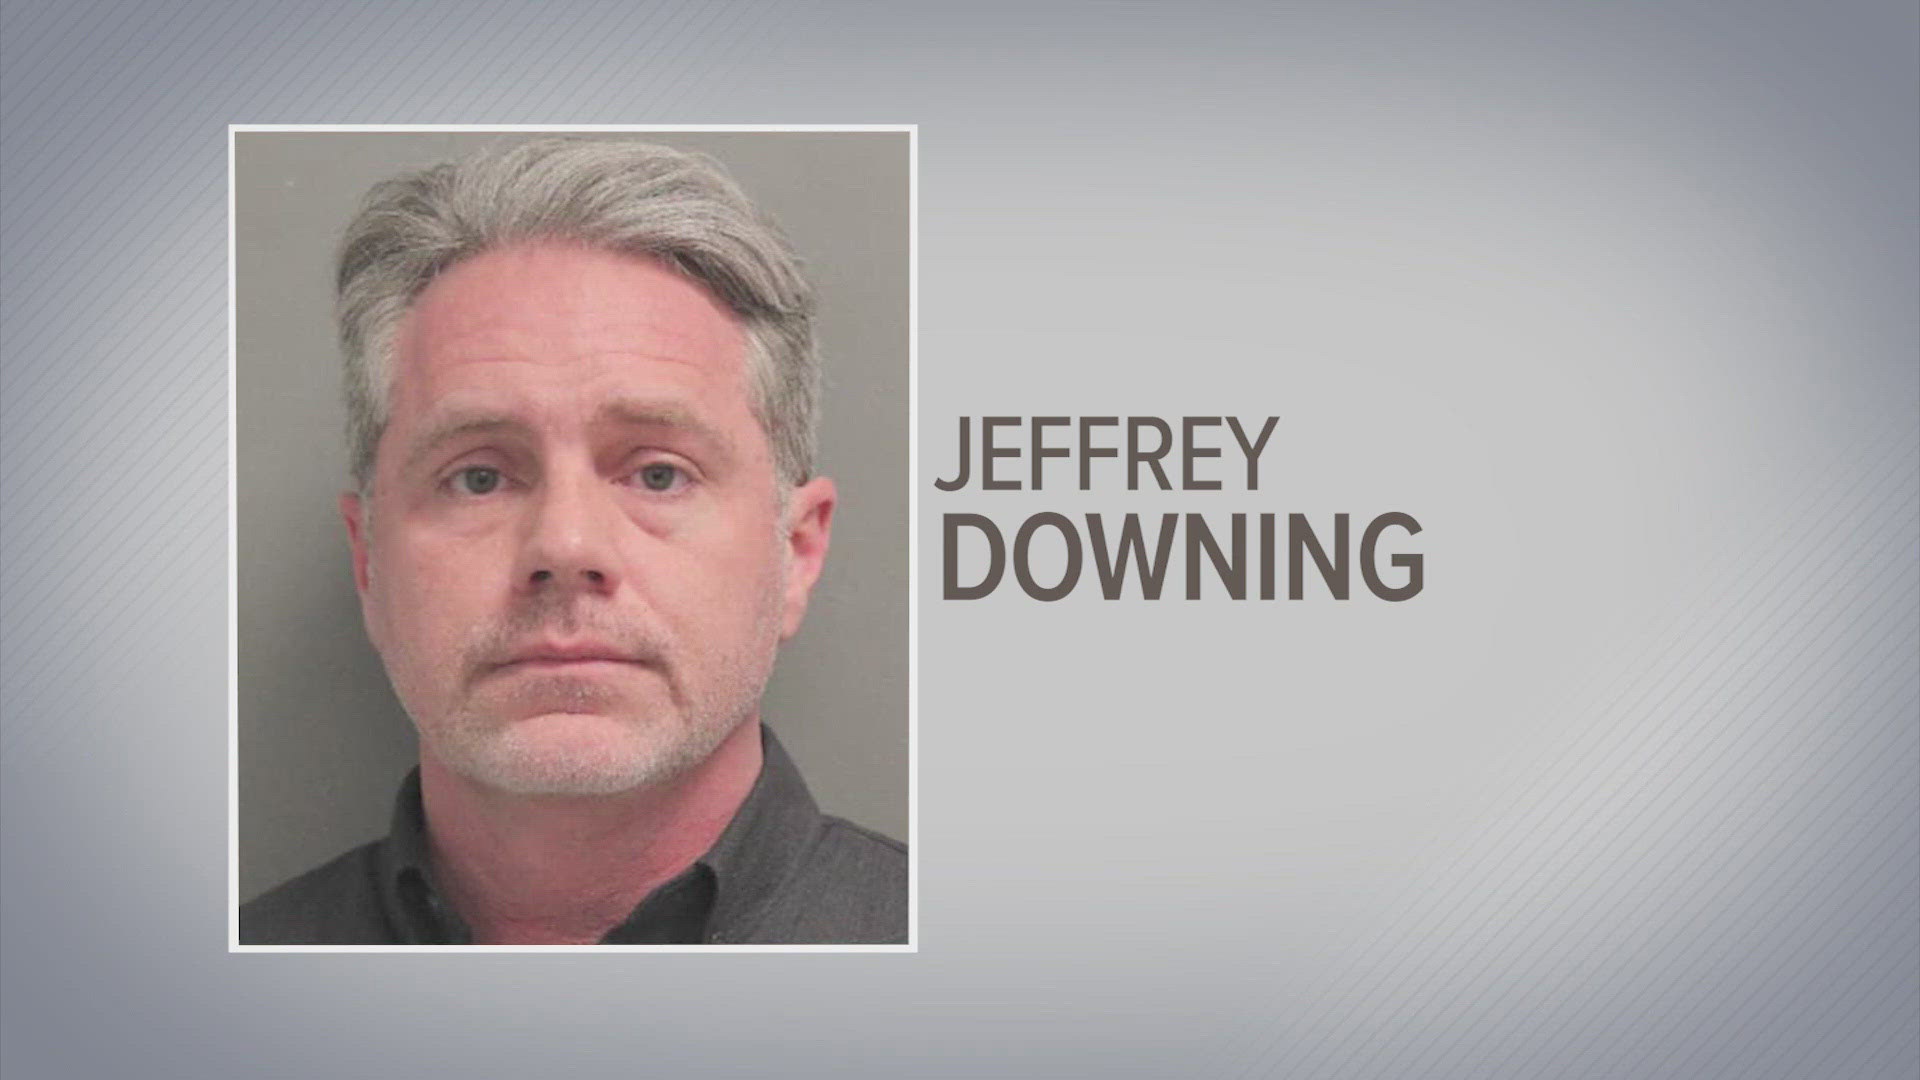 Jeffrey Downing thought he was chatting online with a 15-year-old but it was really an undercover deputy constable, Pct. 1 said. He was with HCDAO before HLSR.